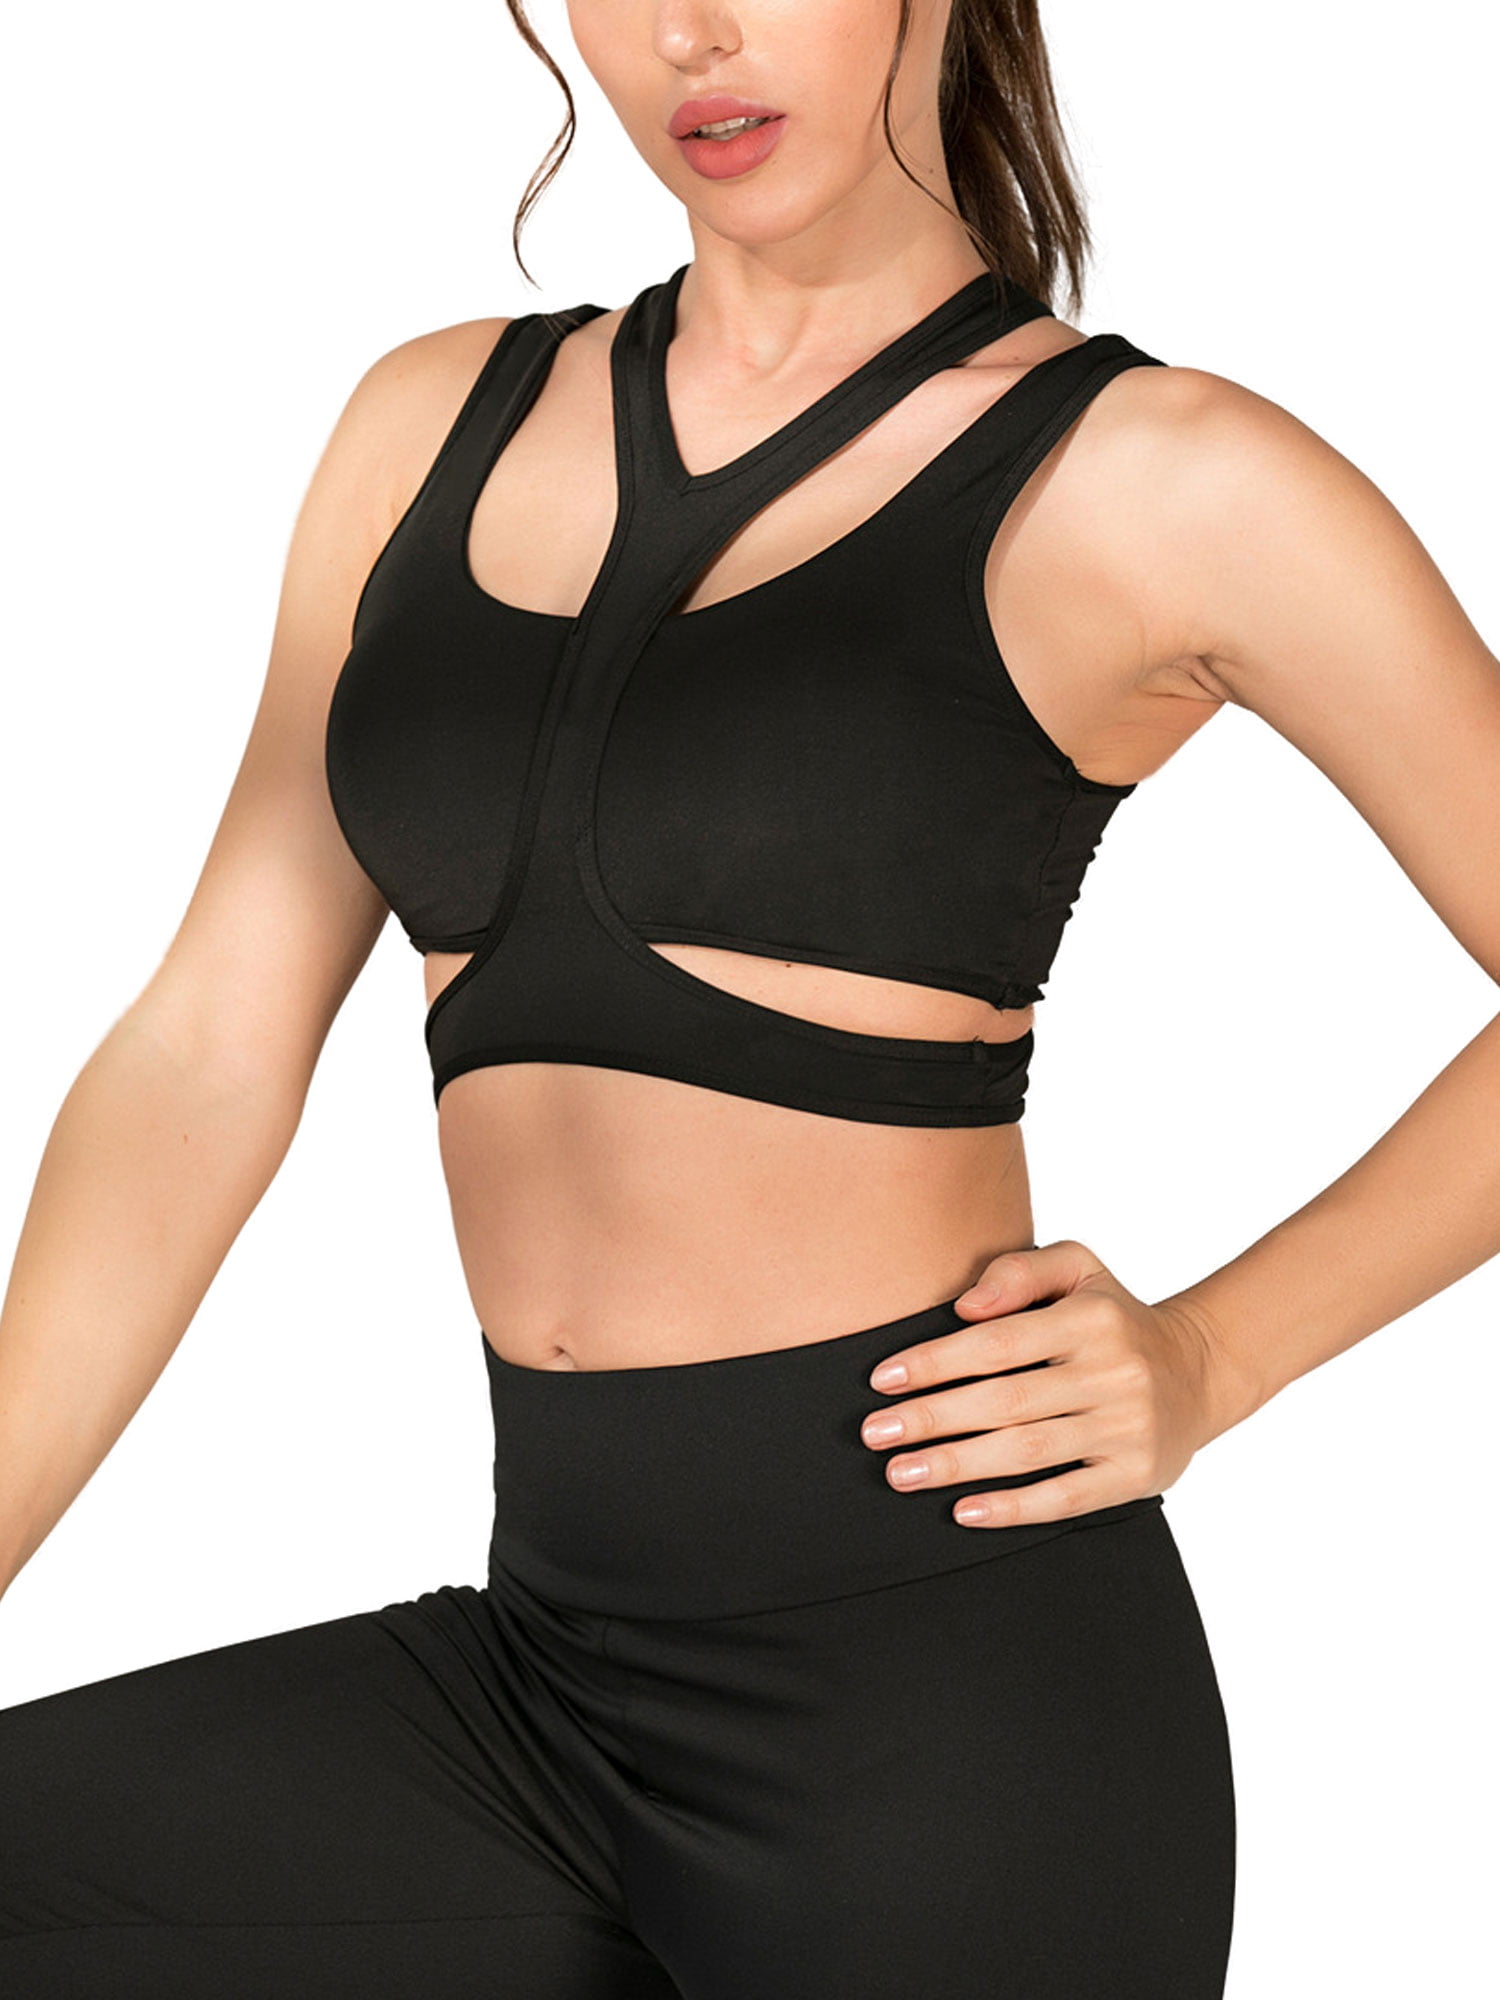 Black S Women Stitching Color Workout Vest Running Yoga Gym Sport Fitness Athletic Bra 